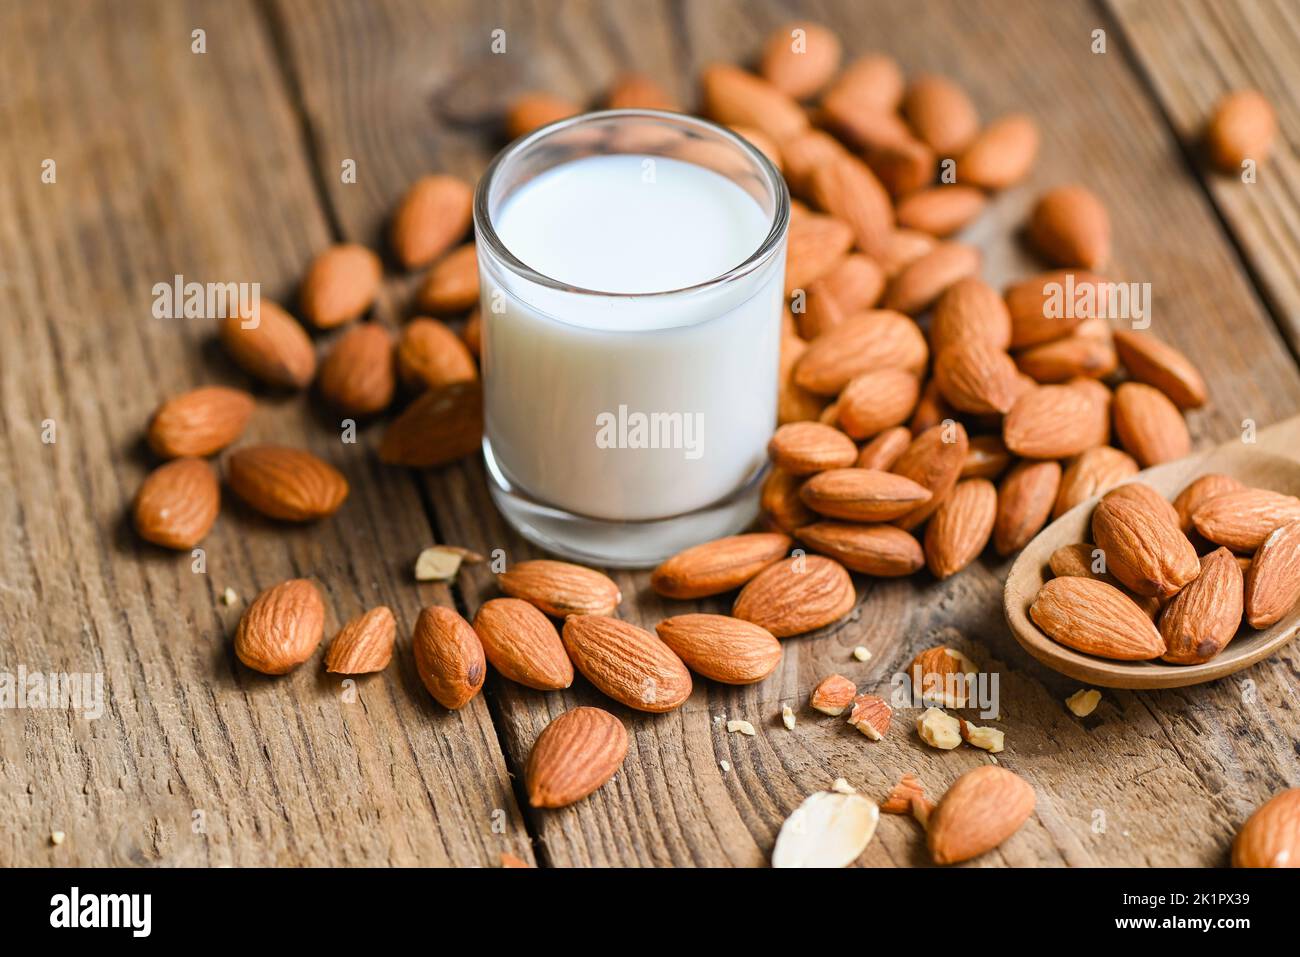 Almond milk and Almonds nuts wooden background, Delicious sweet almonds on table, roasted almond nut for healthy food and snack Stock Photo